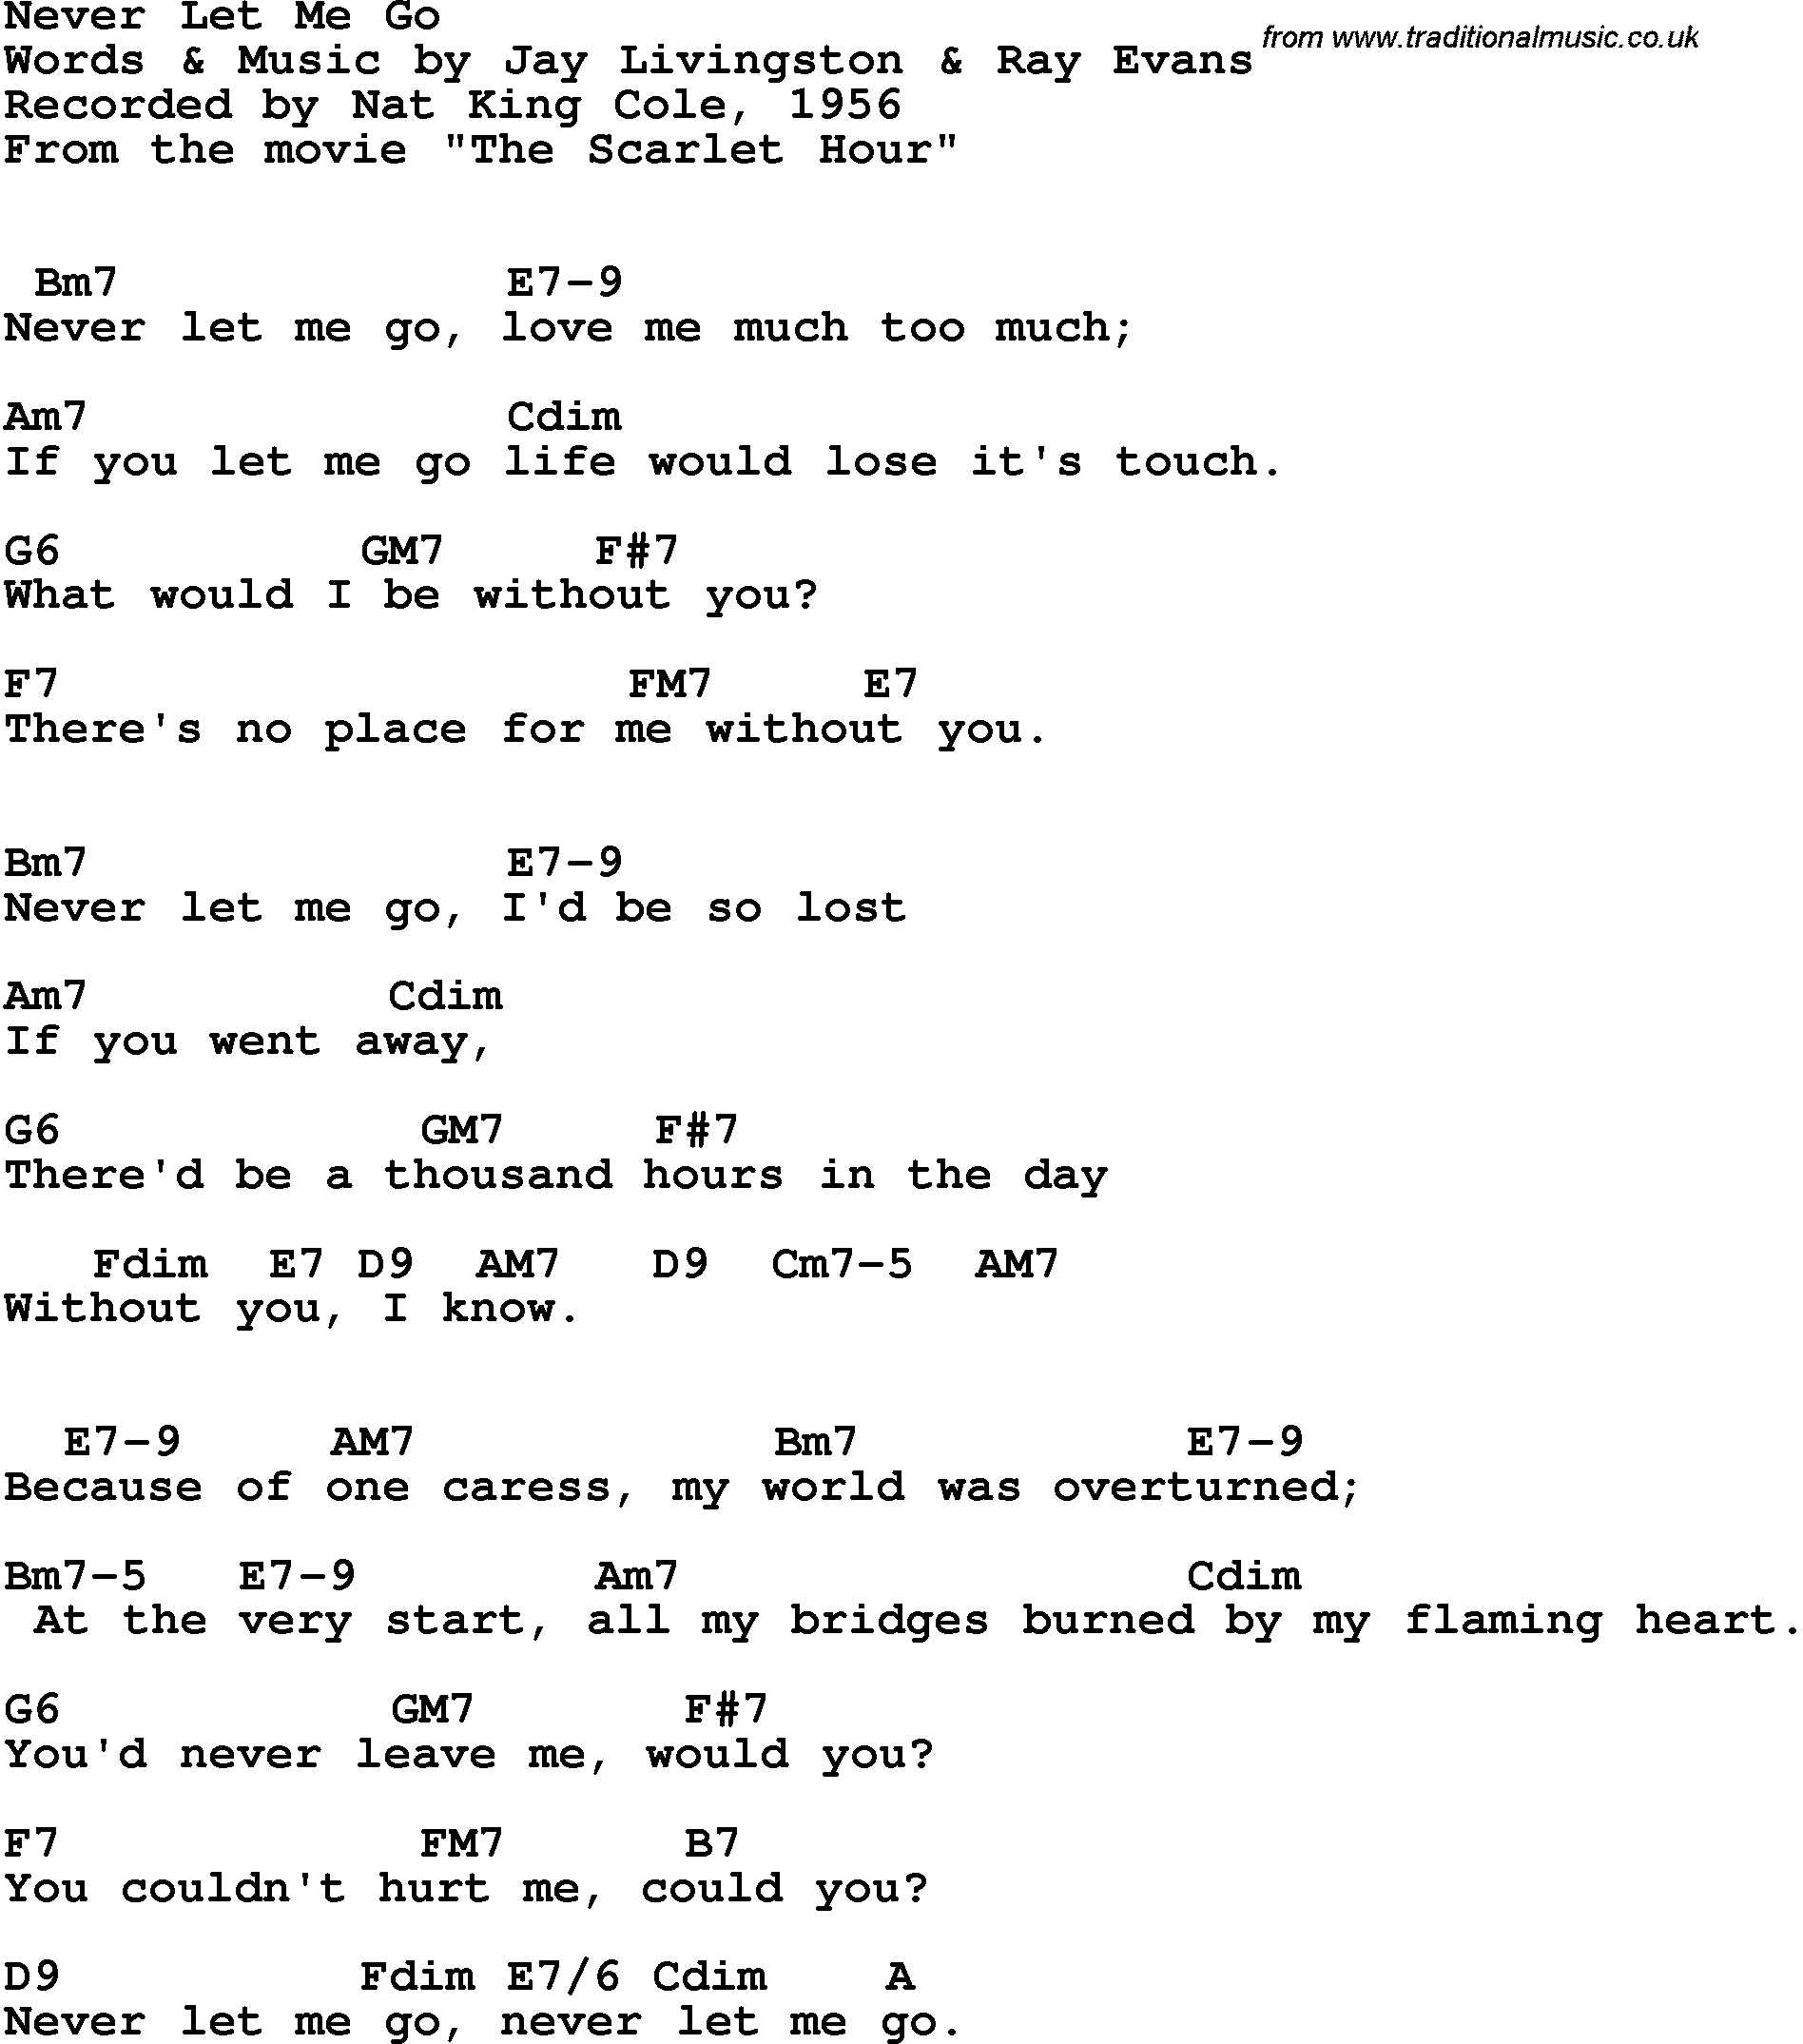 Song Lyrics with guitar chords for Never Let Me Go - Nat King Cole, 1956